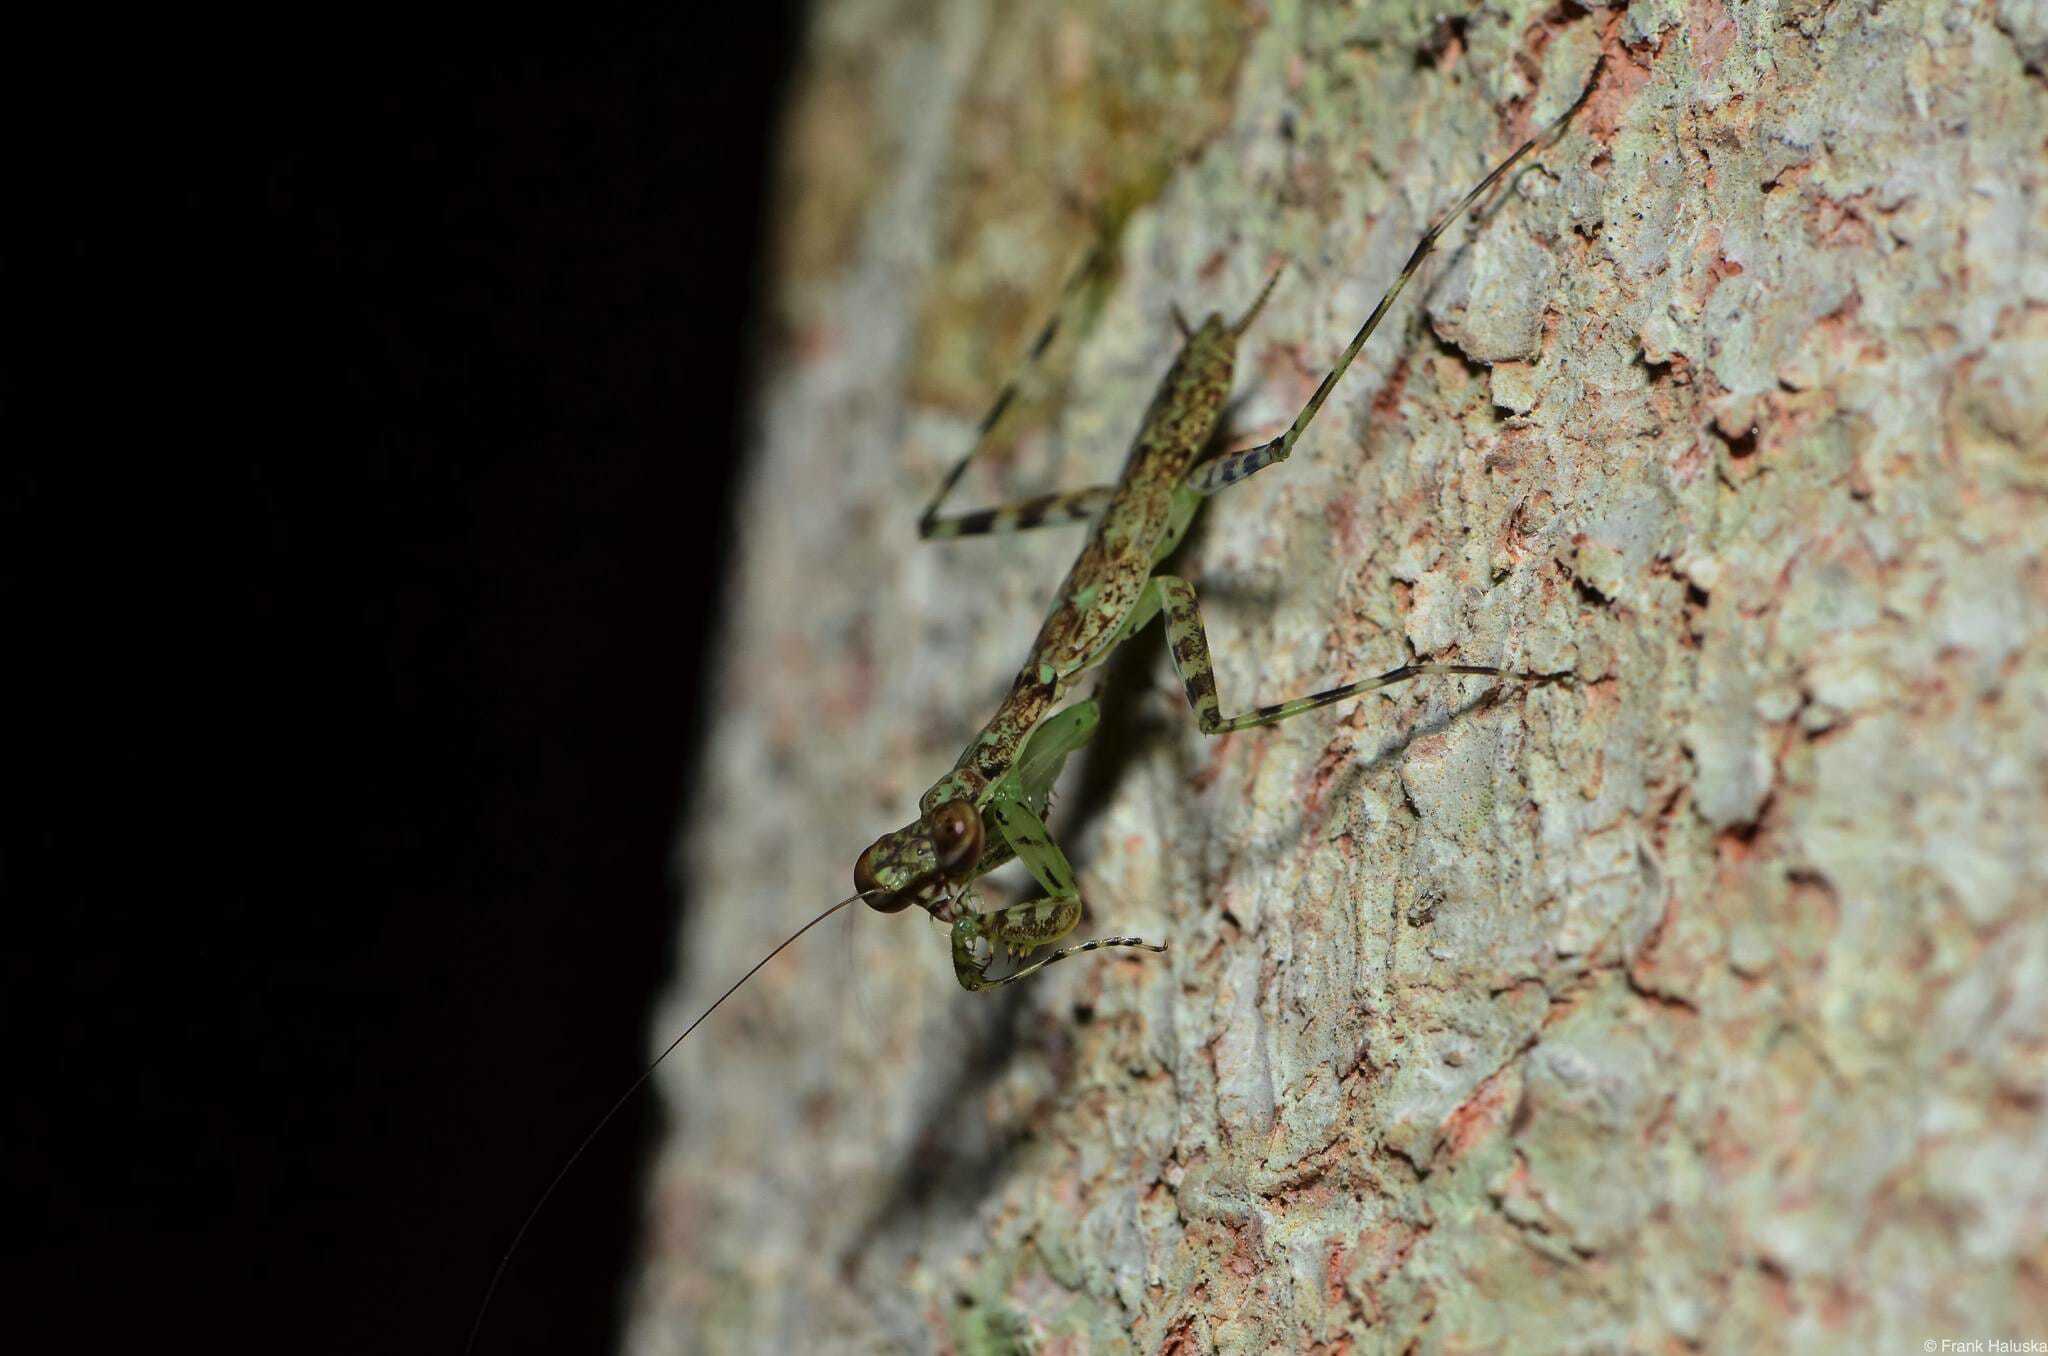 Insect on tree at night